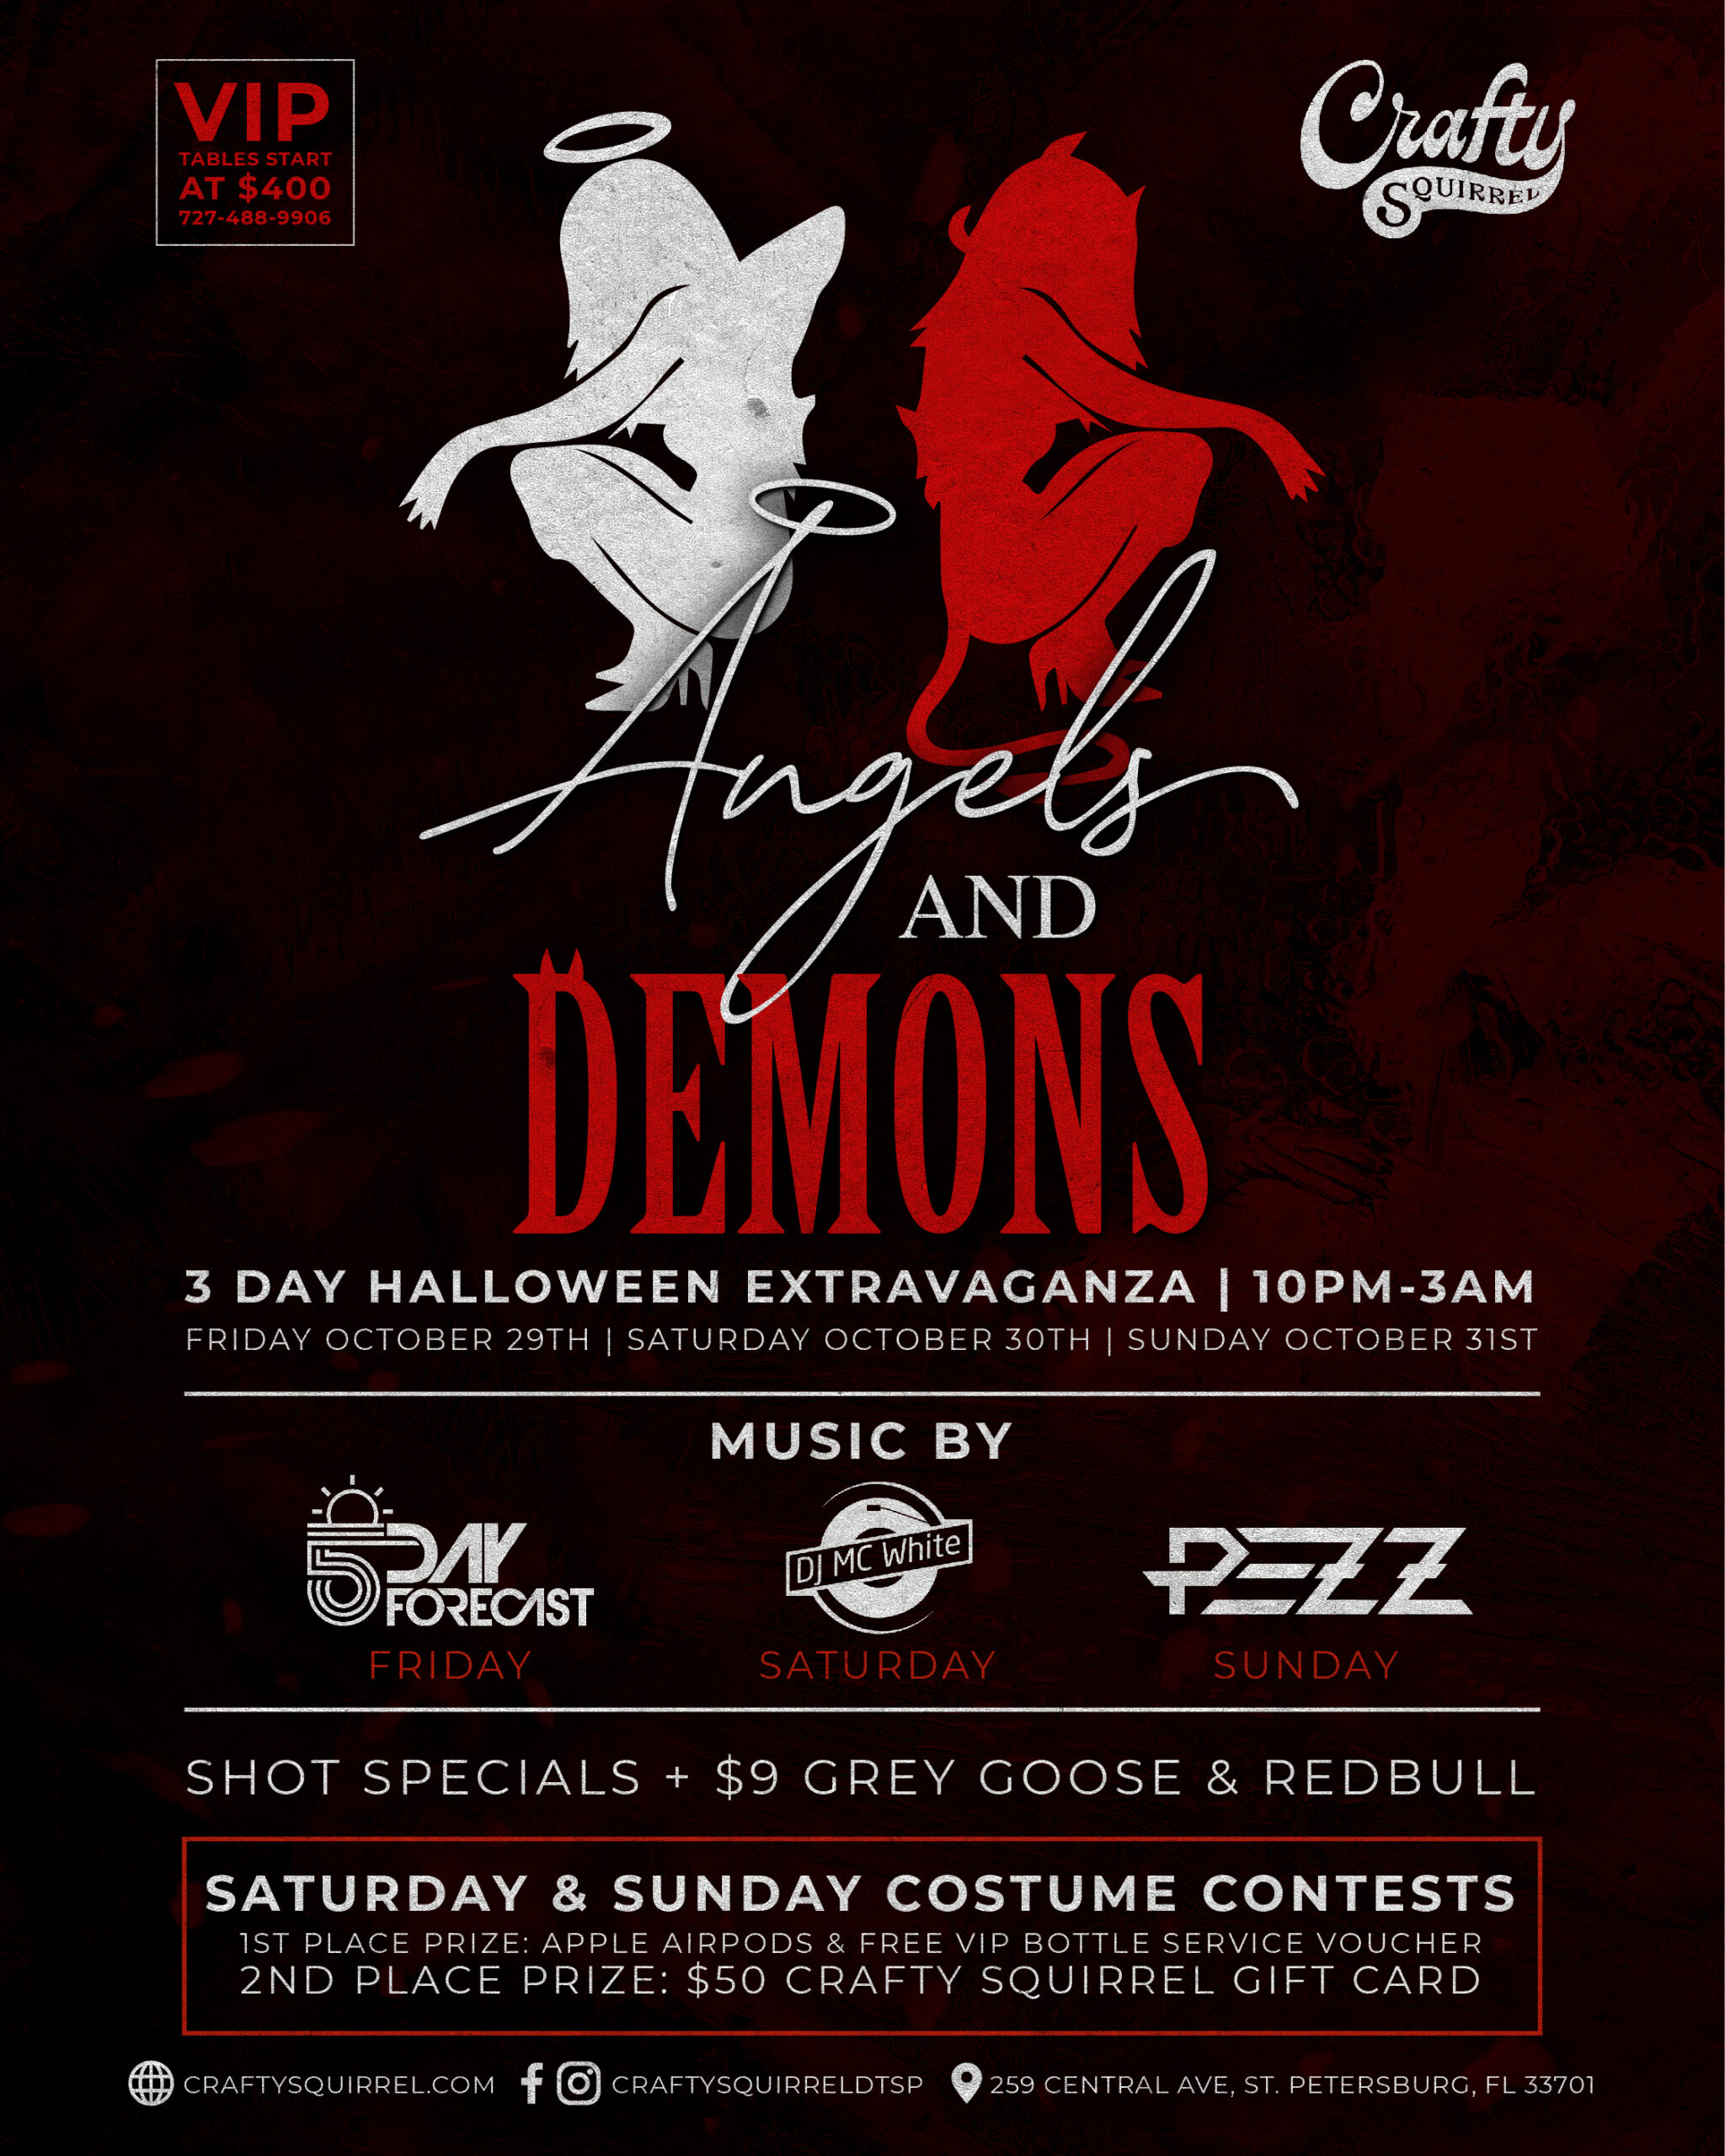 The Crafty Squirrel Announces “Angels & Demons” Costume Party Halloween Weekend